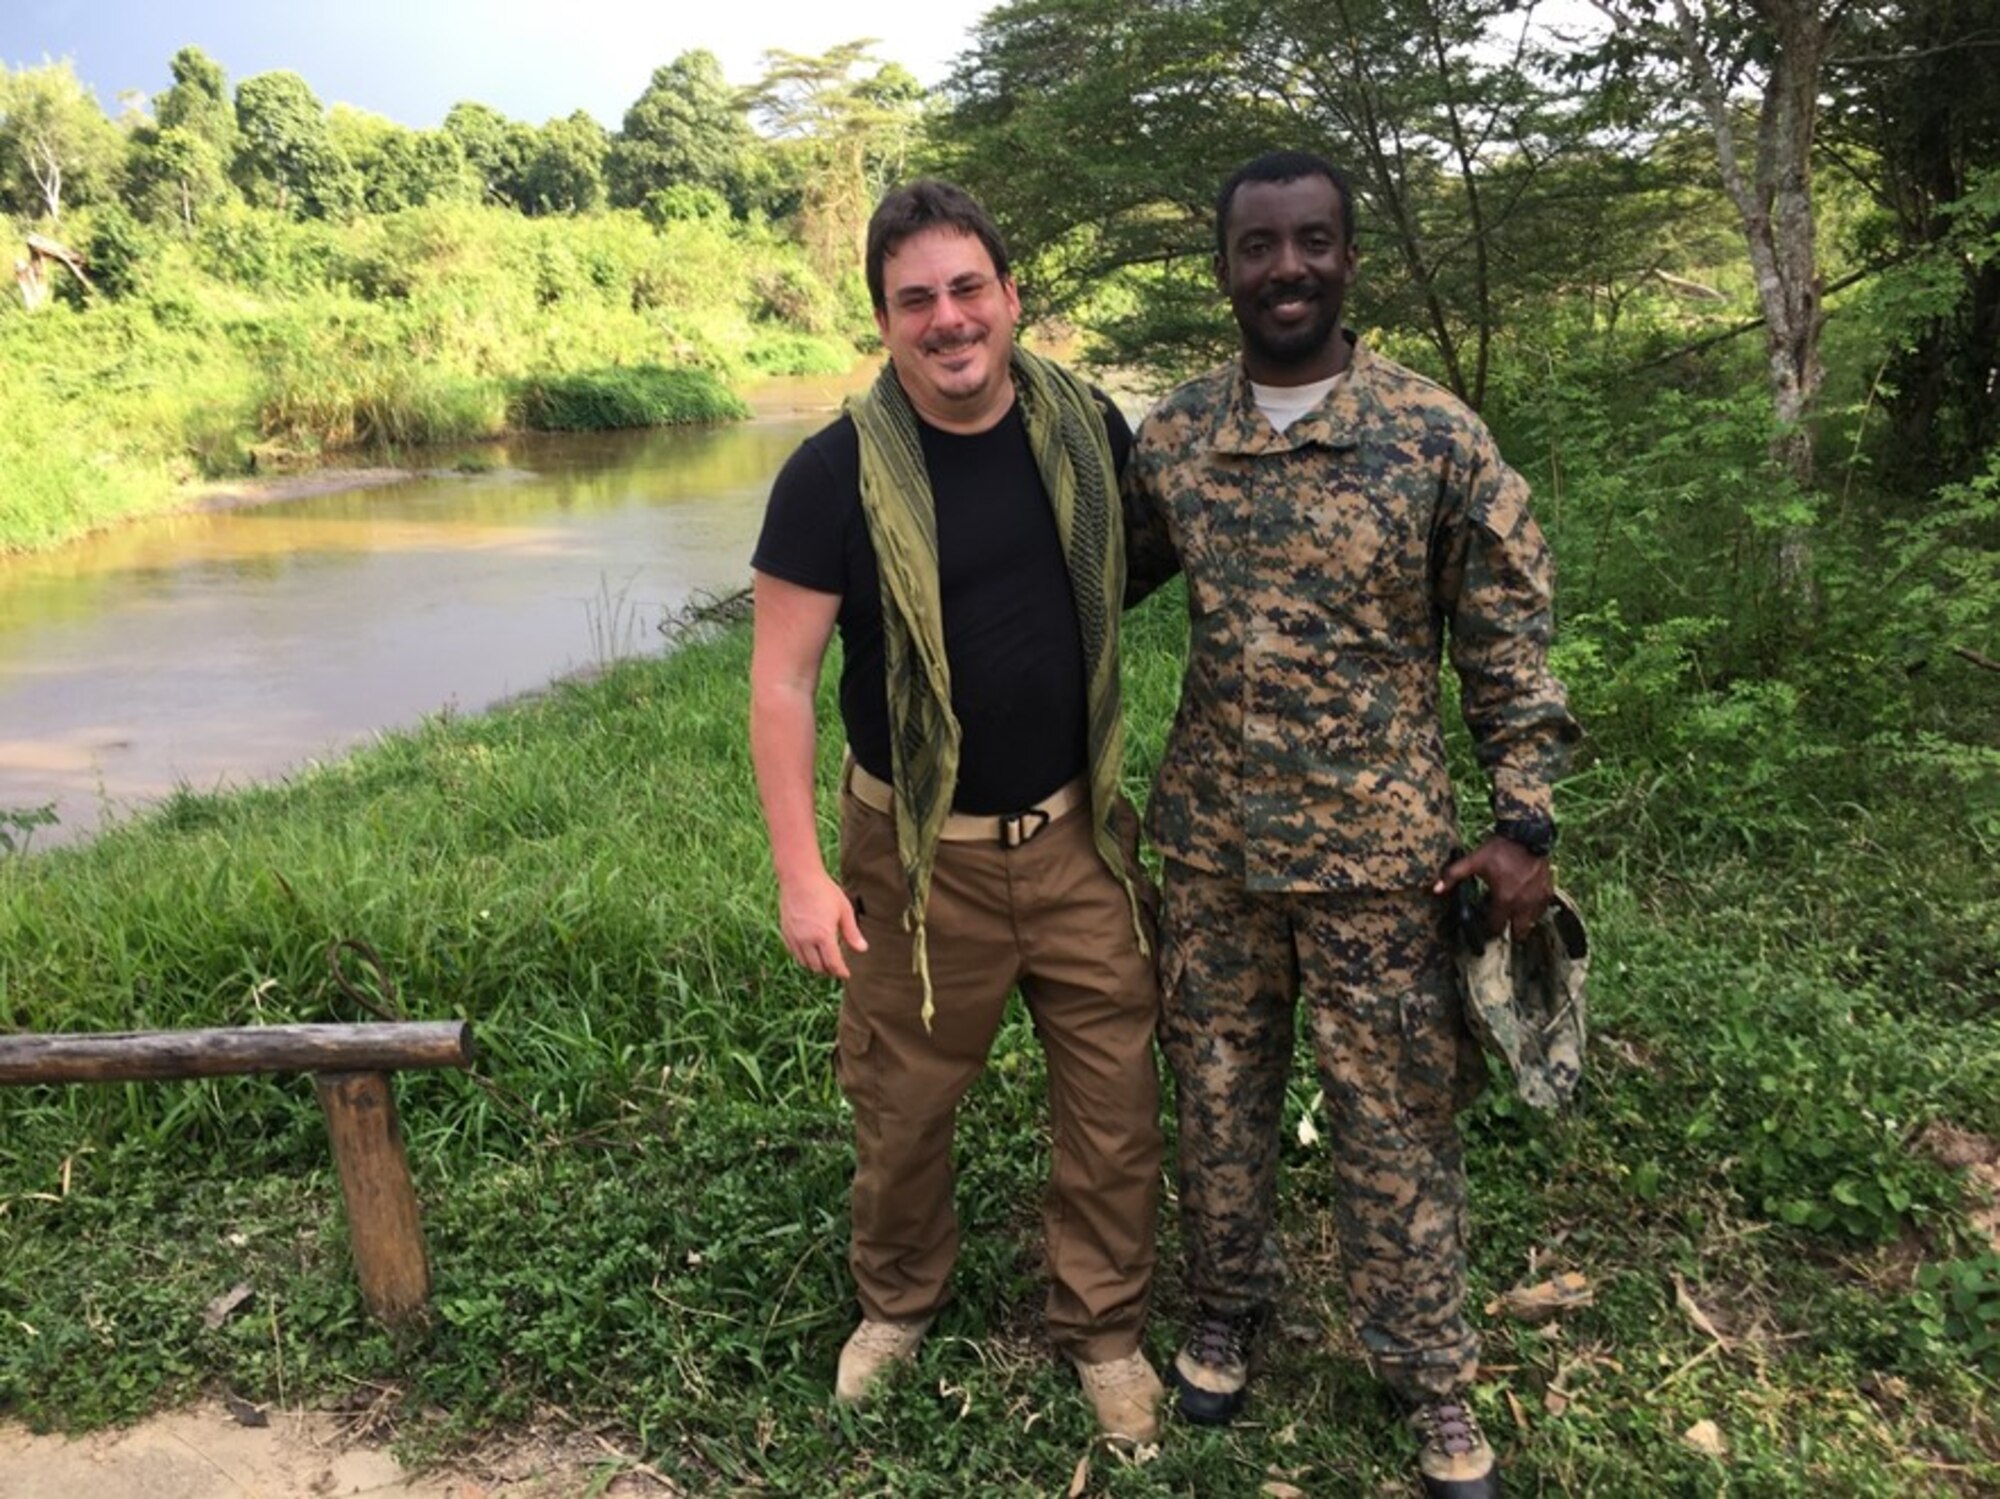 Air Force Office of Special Investigations Force Protection Detachment Uganda Special Agent In Charge Keith Ide is joined by the Uganda Special Force Command Commando/Battalion Commander near the command post along the Ntungwe River in Queen Elizabeth National Park, Uganda, after the successful hostage rescue. SA Ide directed strategic intelligence, surveillance and reconnaissance to support the Ugandan Commandos and rescue operations in the Democratic Republic of the Congo. (Courtesy photo)